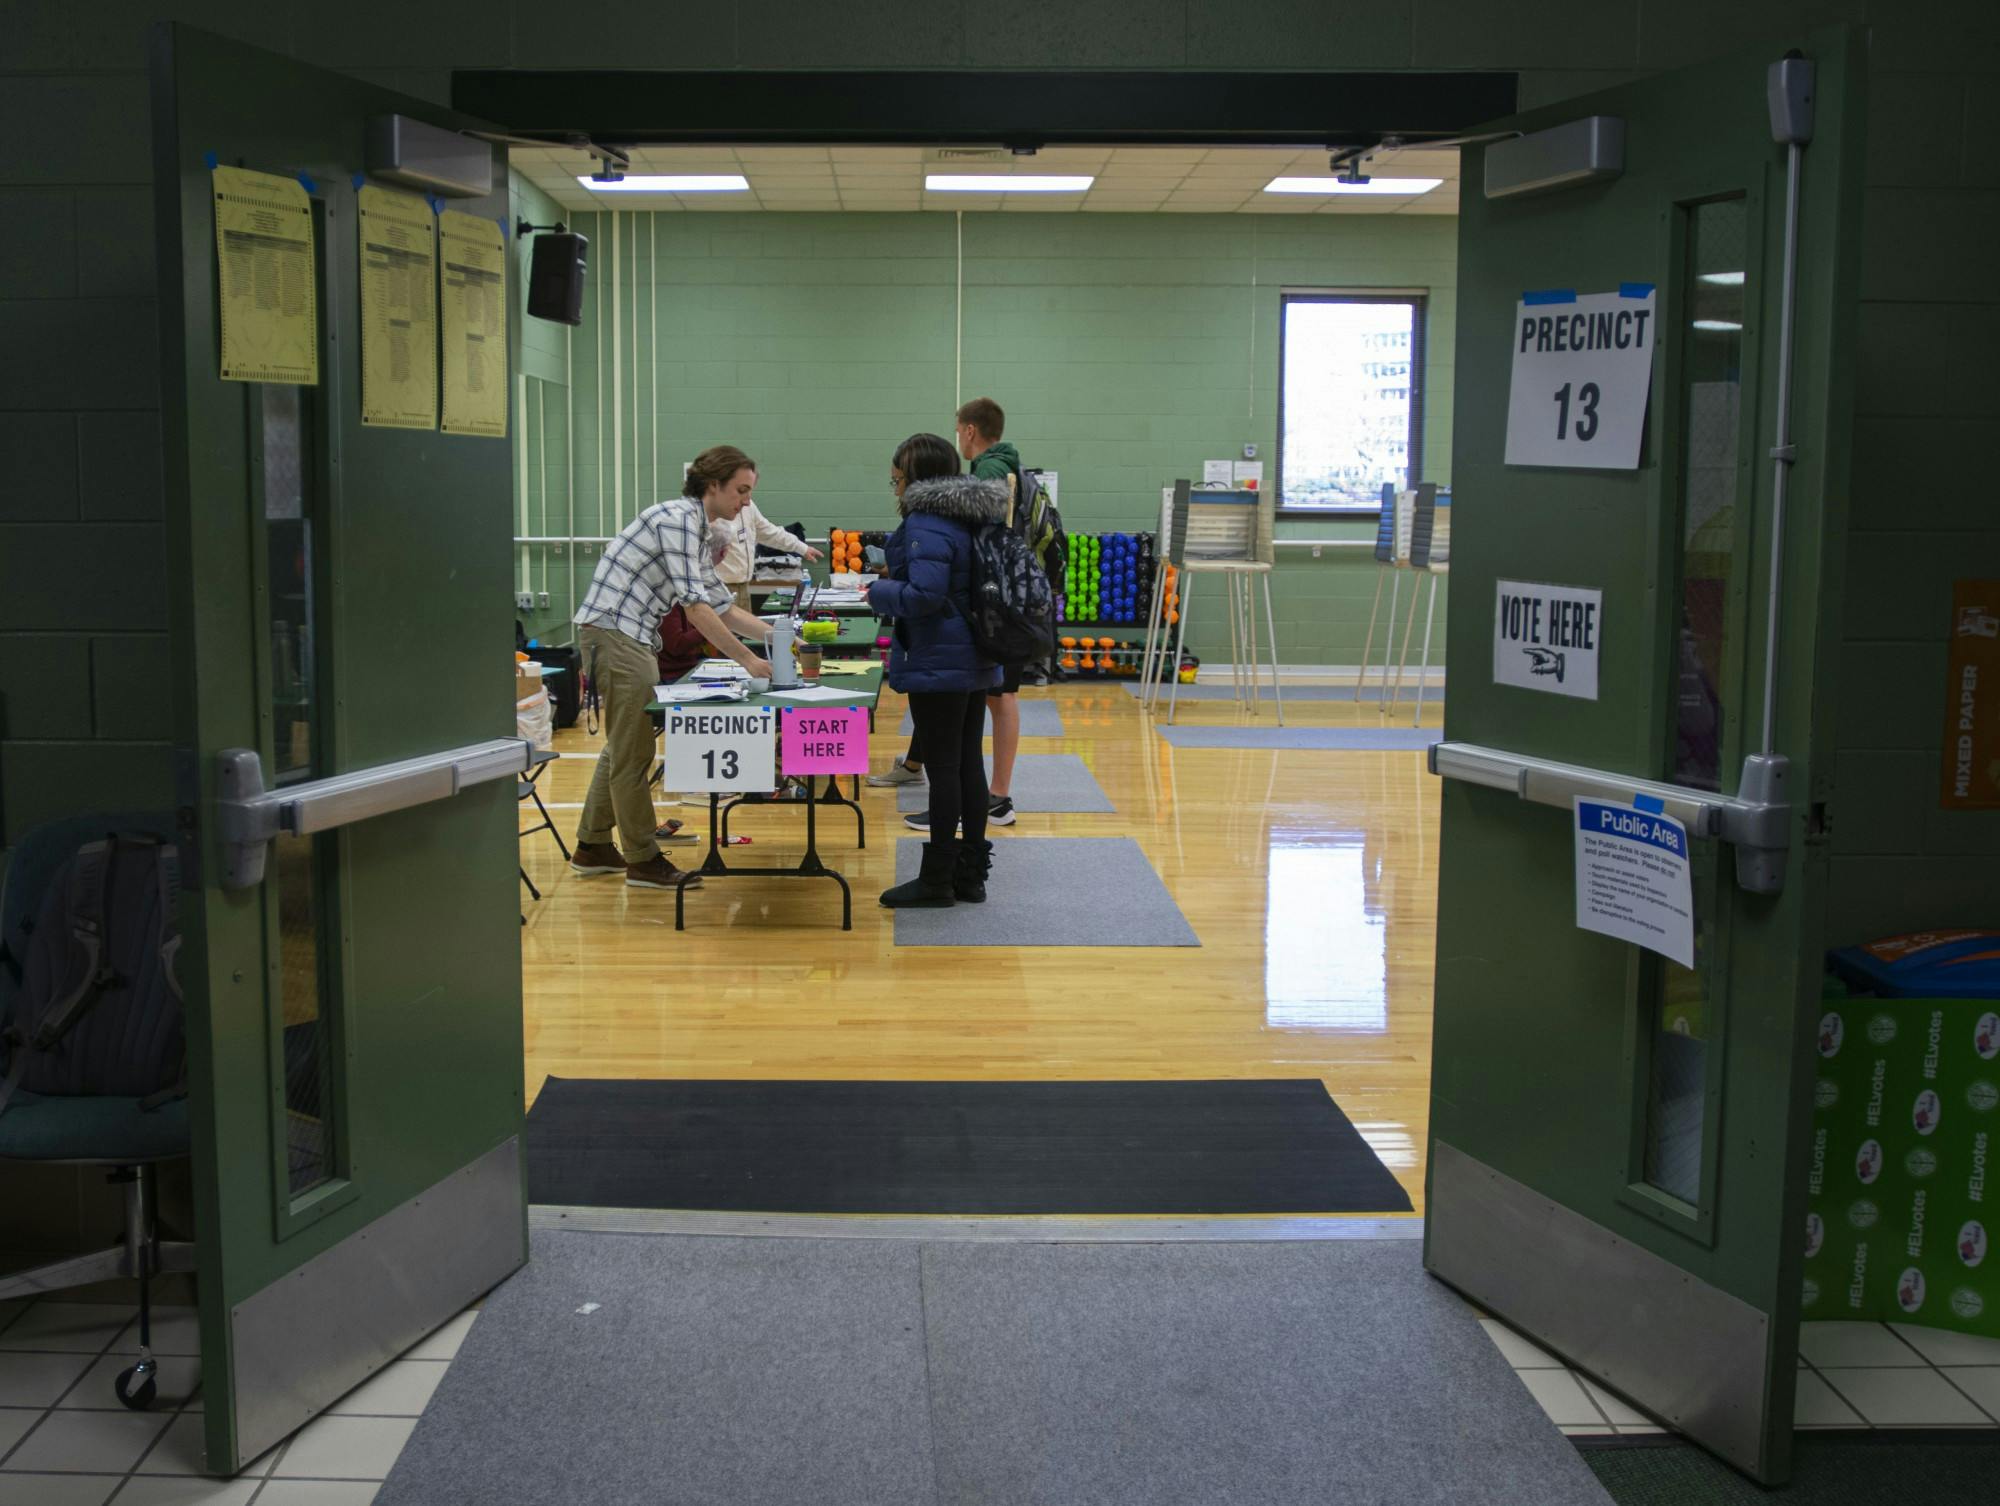 <p>Volunteers help students during their voting process at the District 13 polling precinct in IM Sports East. The Michigan primary took place March 10, 2020.</p>